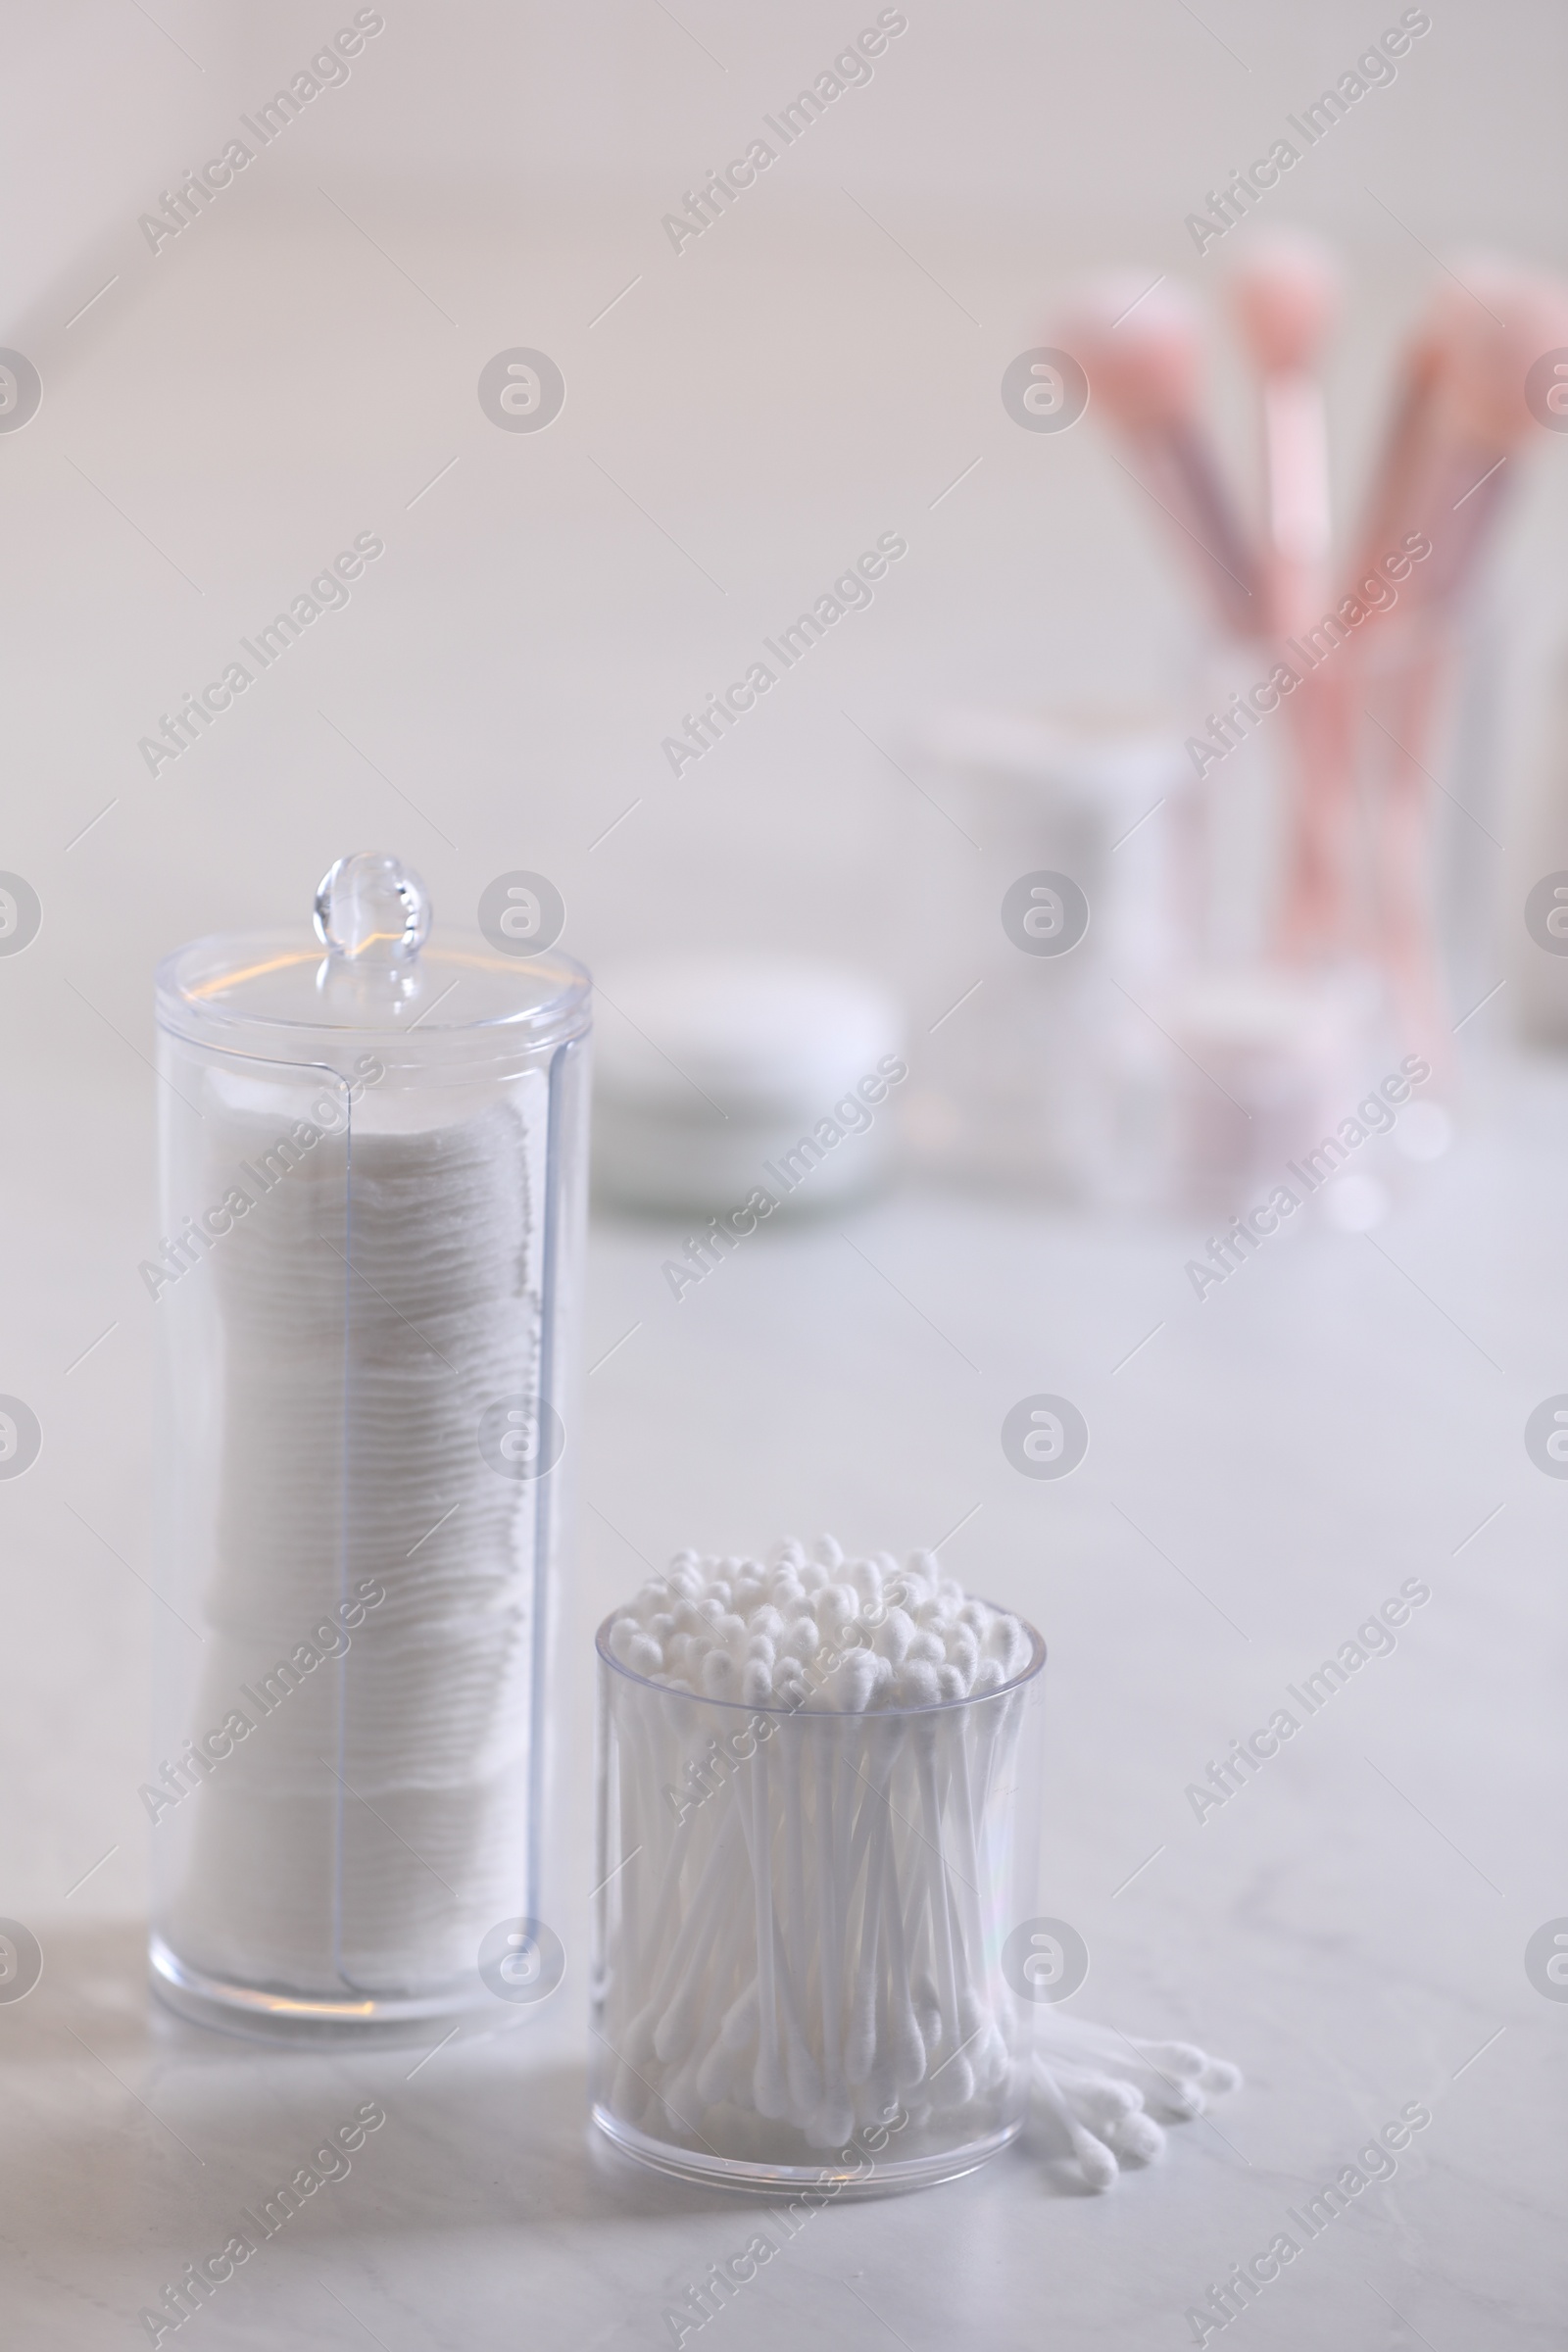 Photo of Cotton buds and pads in transparent holders on light table